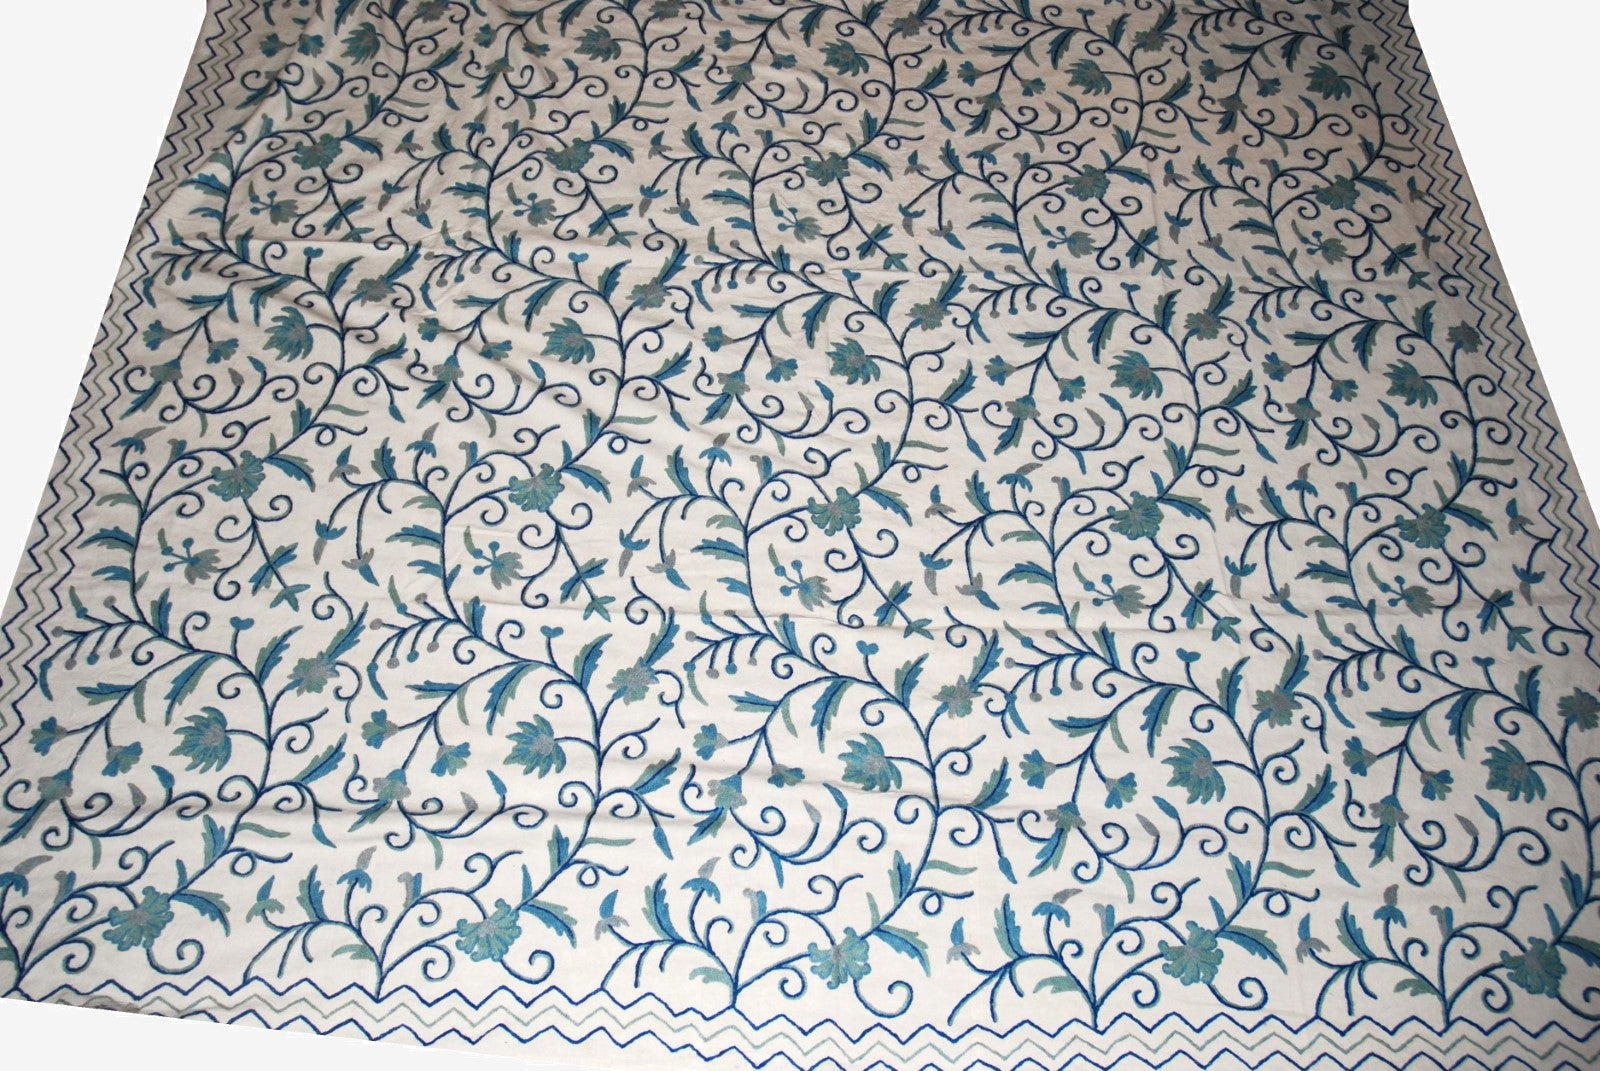 Cotton Crewel Embroidered Bedspread Jacobean, Blue on White #TML1011